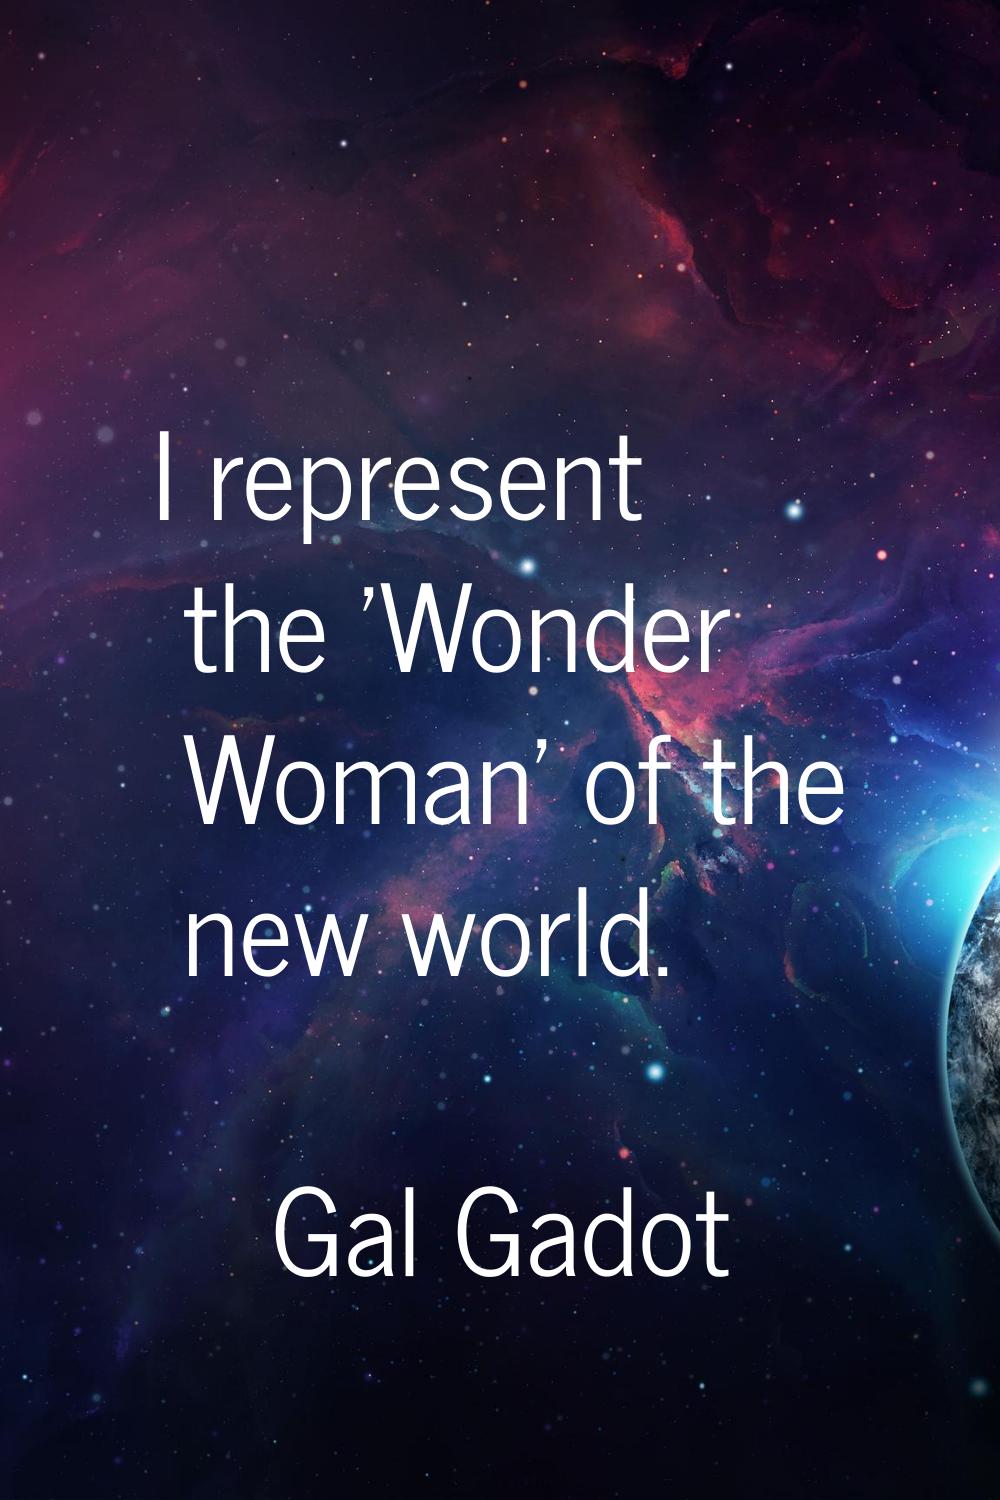 I represent the 'Wonder Woman' of the new world.